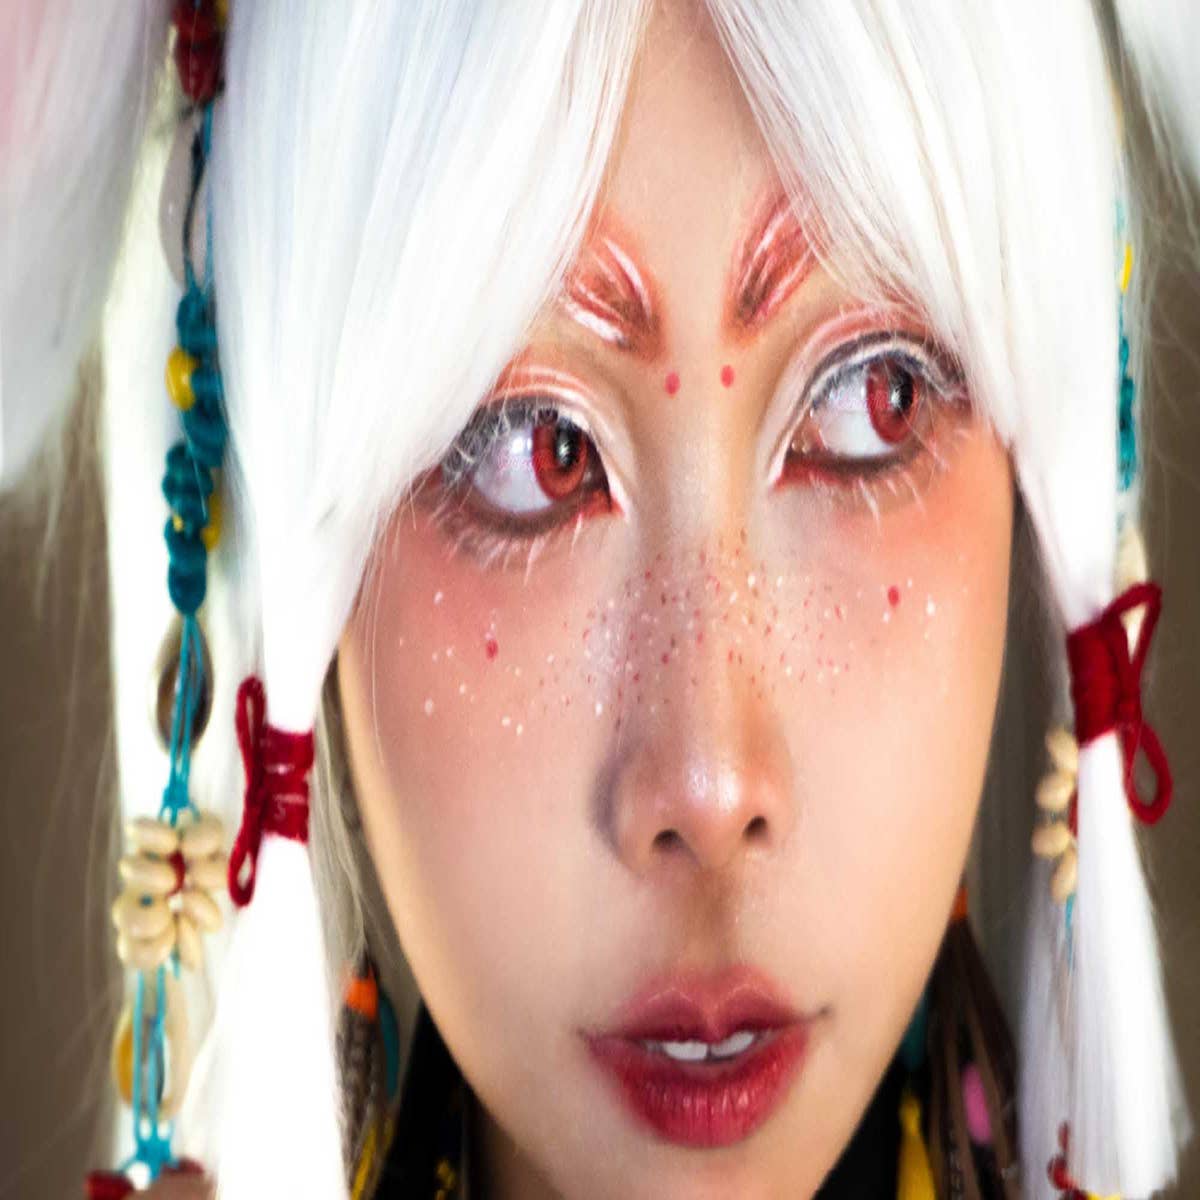 Cosplay Contacts: Why do I need Prescription for Cosplay Contacts?